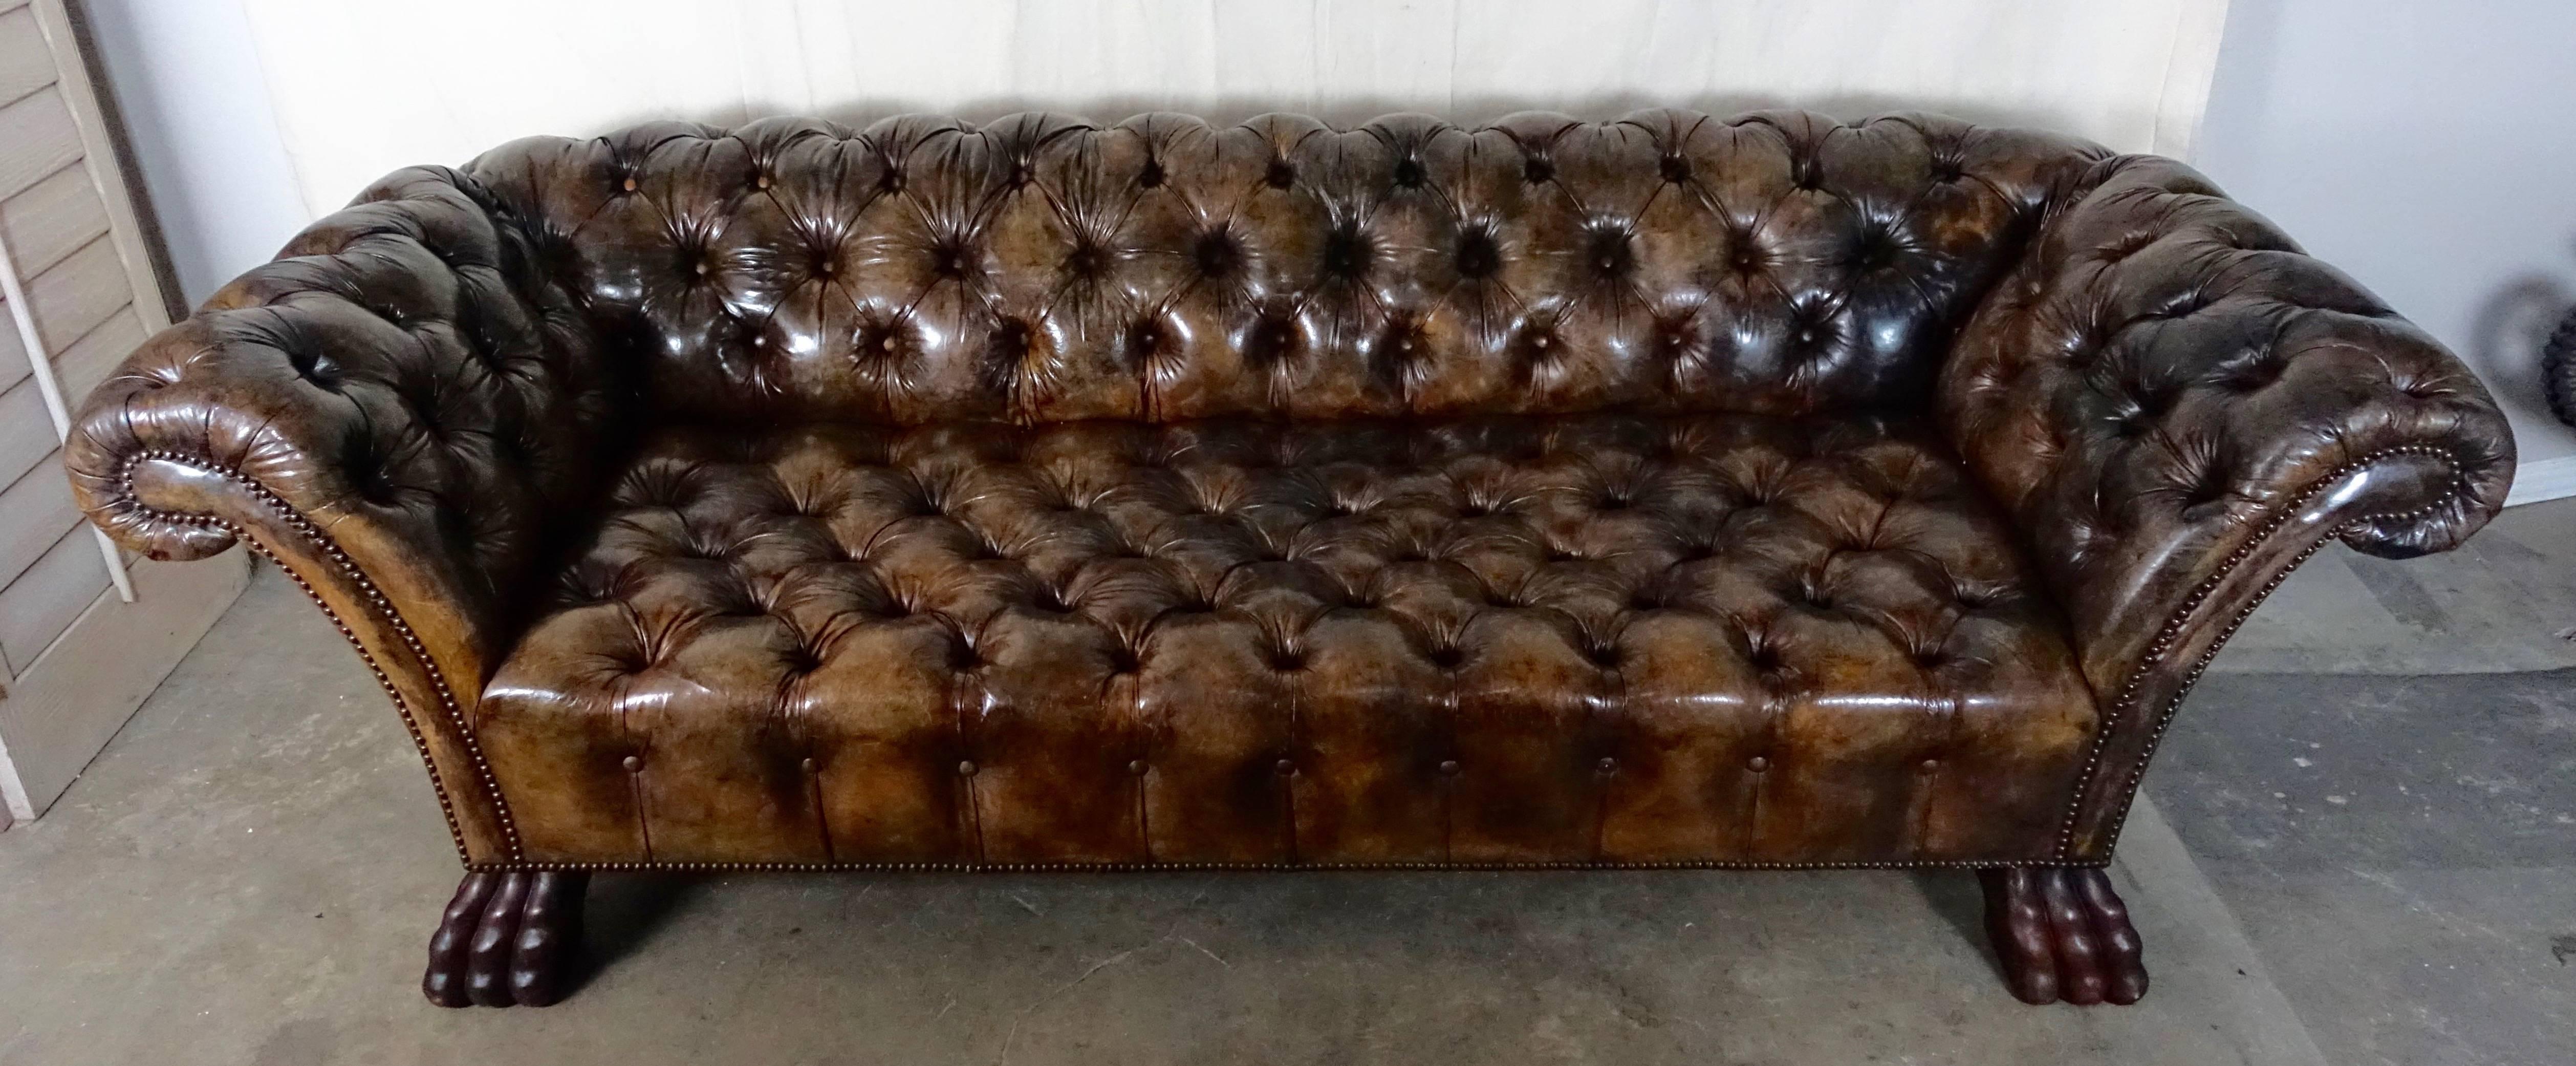 Handsome early 1940s leather tufted sofa standing on four hand carved paw feet. Measures: 16” SH. Antique brass nailhead trim detail. The sofa has developed a rich patina and is in excellent condition.